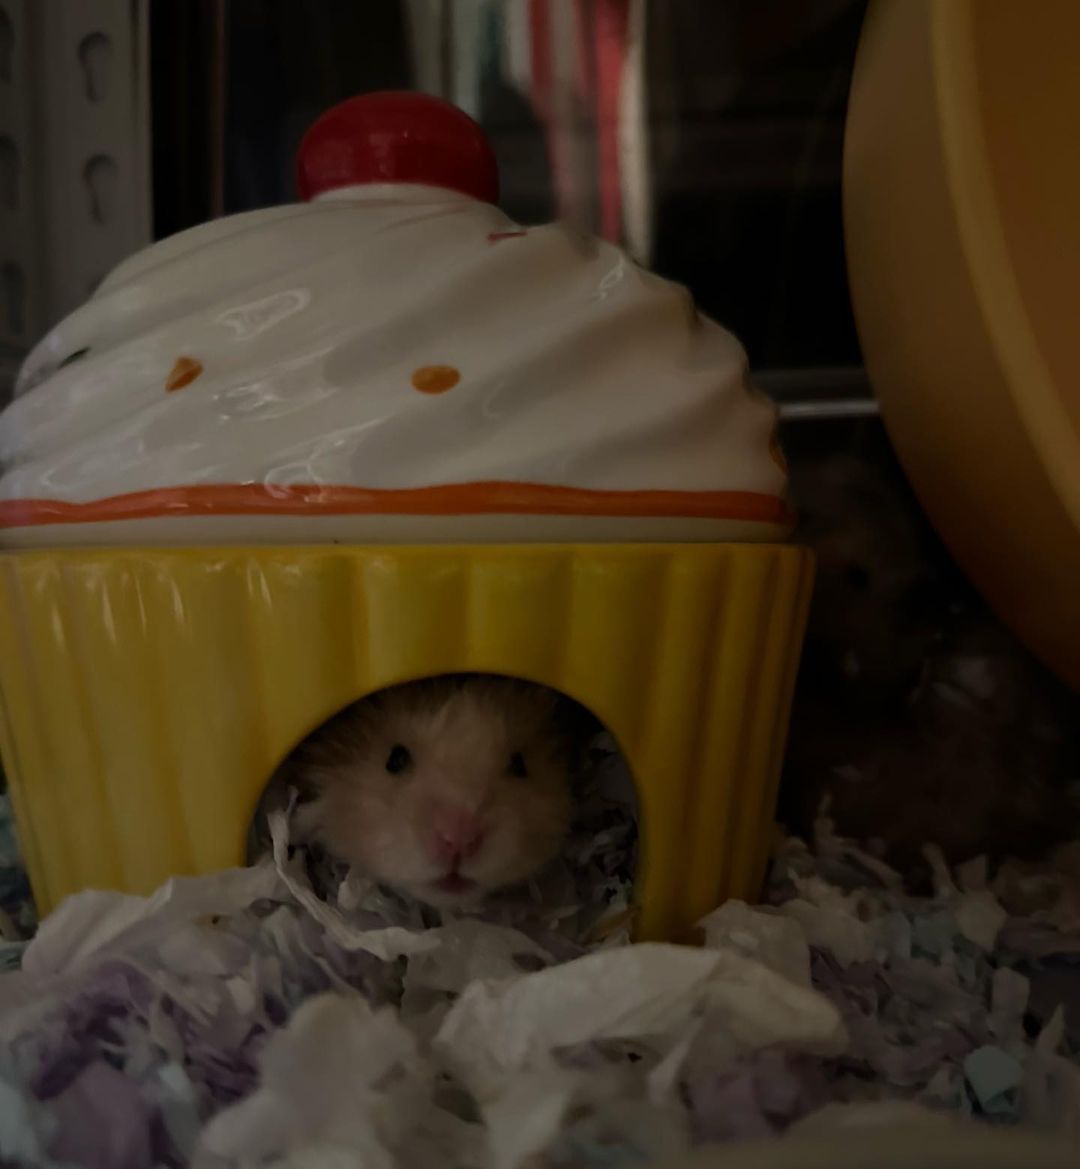 Hamsters in Cups — Comparison of Hamster-in-Cup Game Apps The 3 Apps